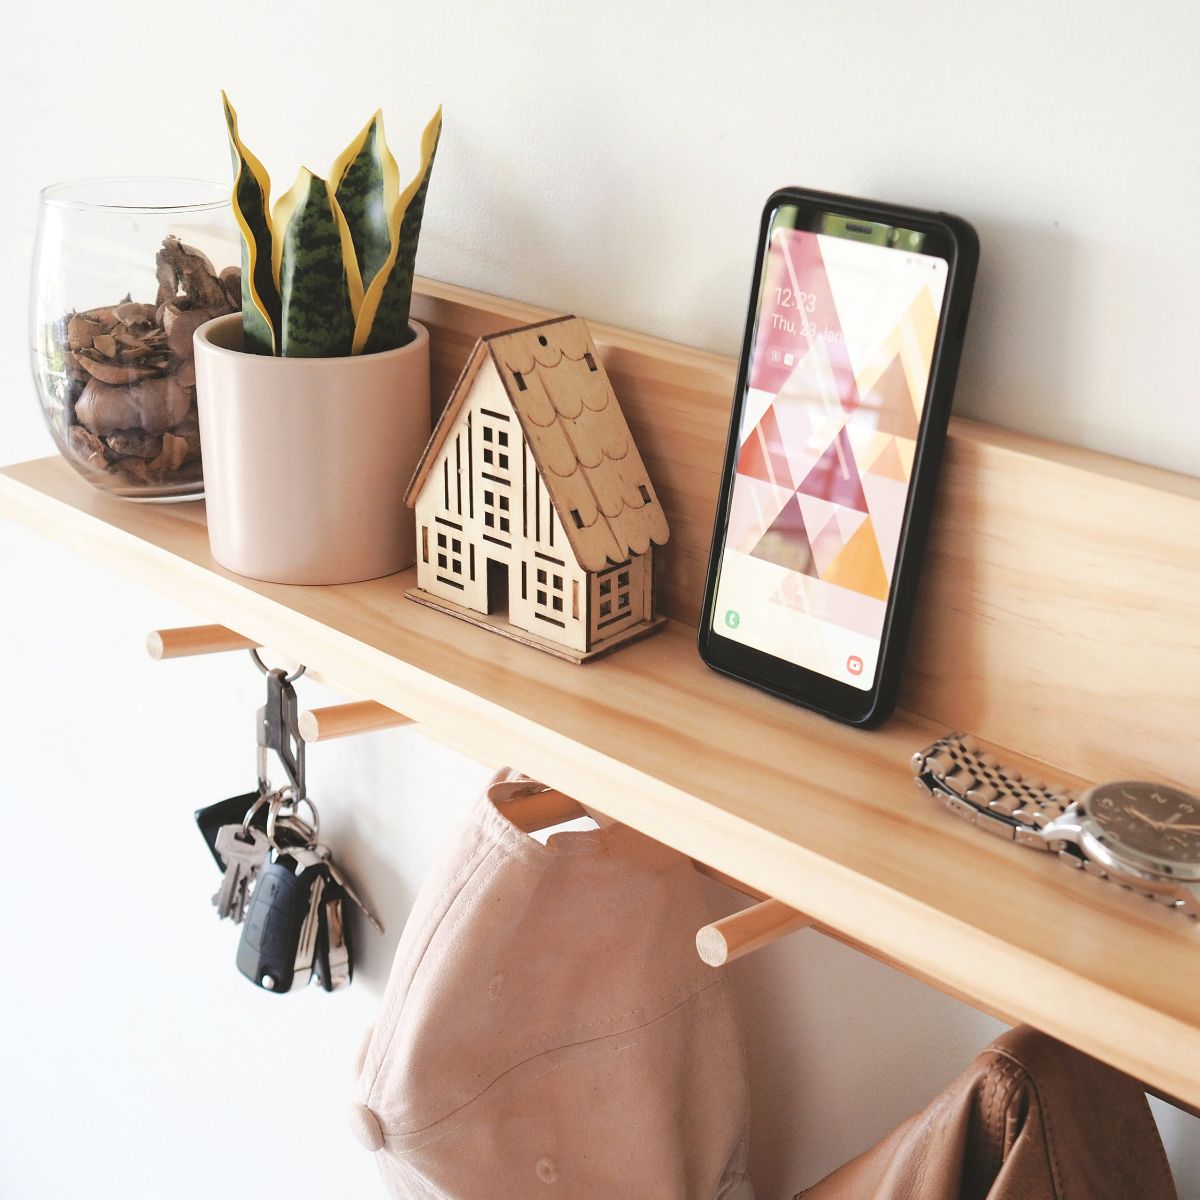 55cm Pine Wood Coat Rack Entryway Organiser Shelf with no mail holder. Top view.